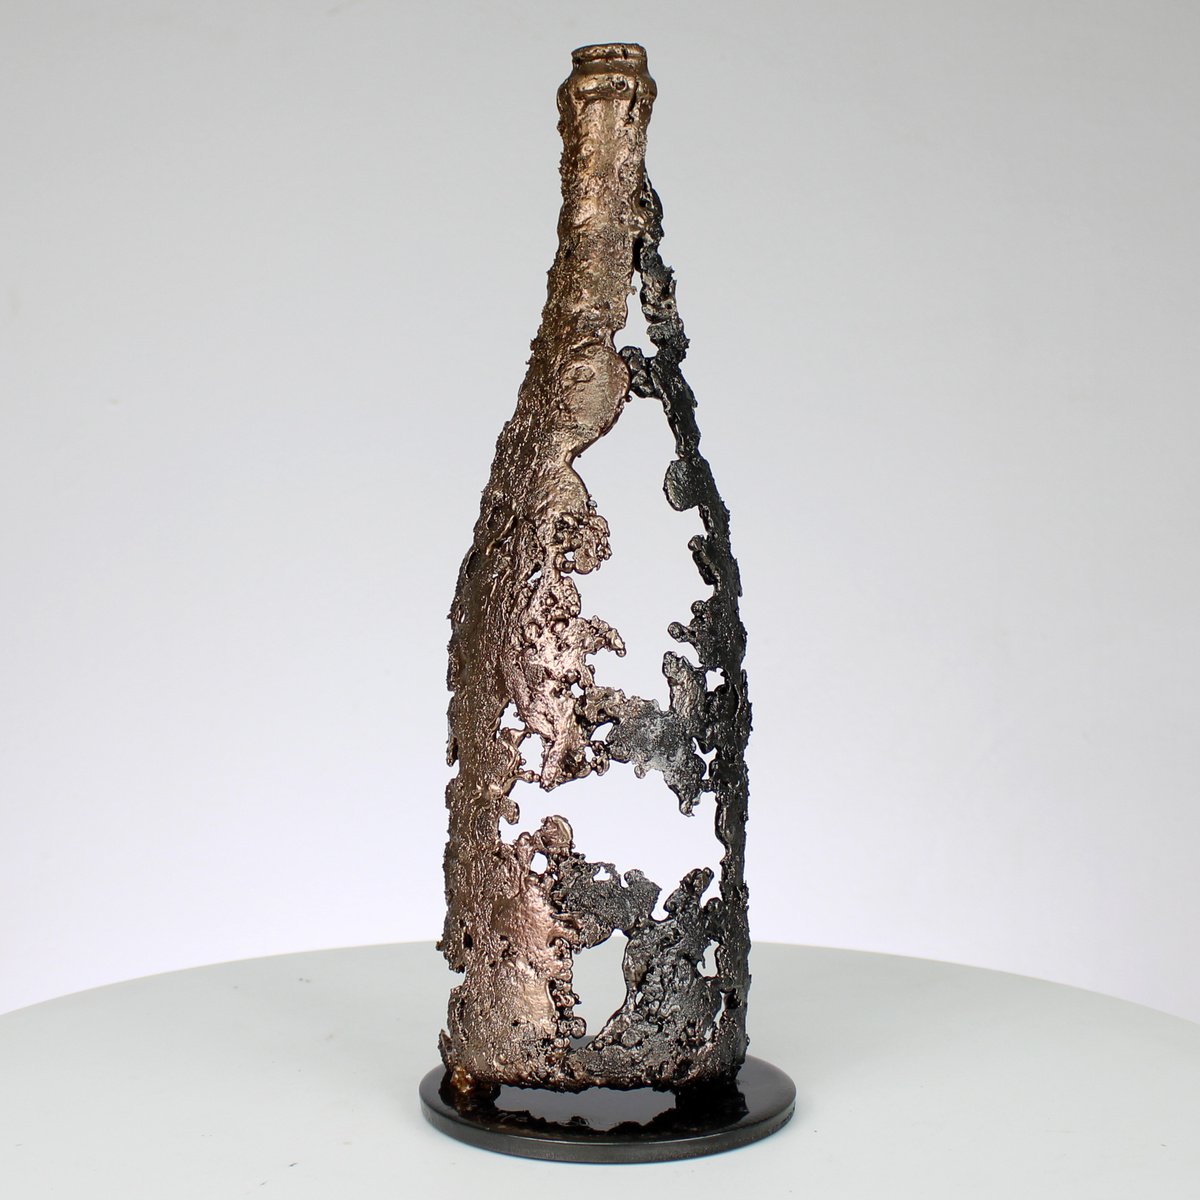 Champagne bottle 142-21 by Philippe Buil